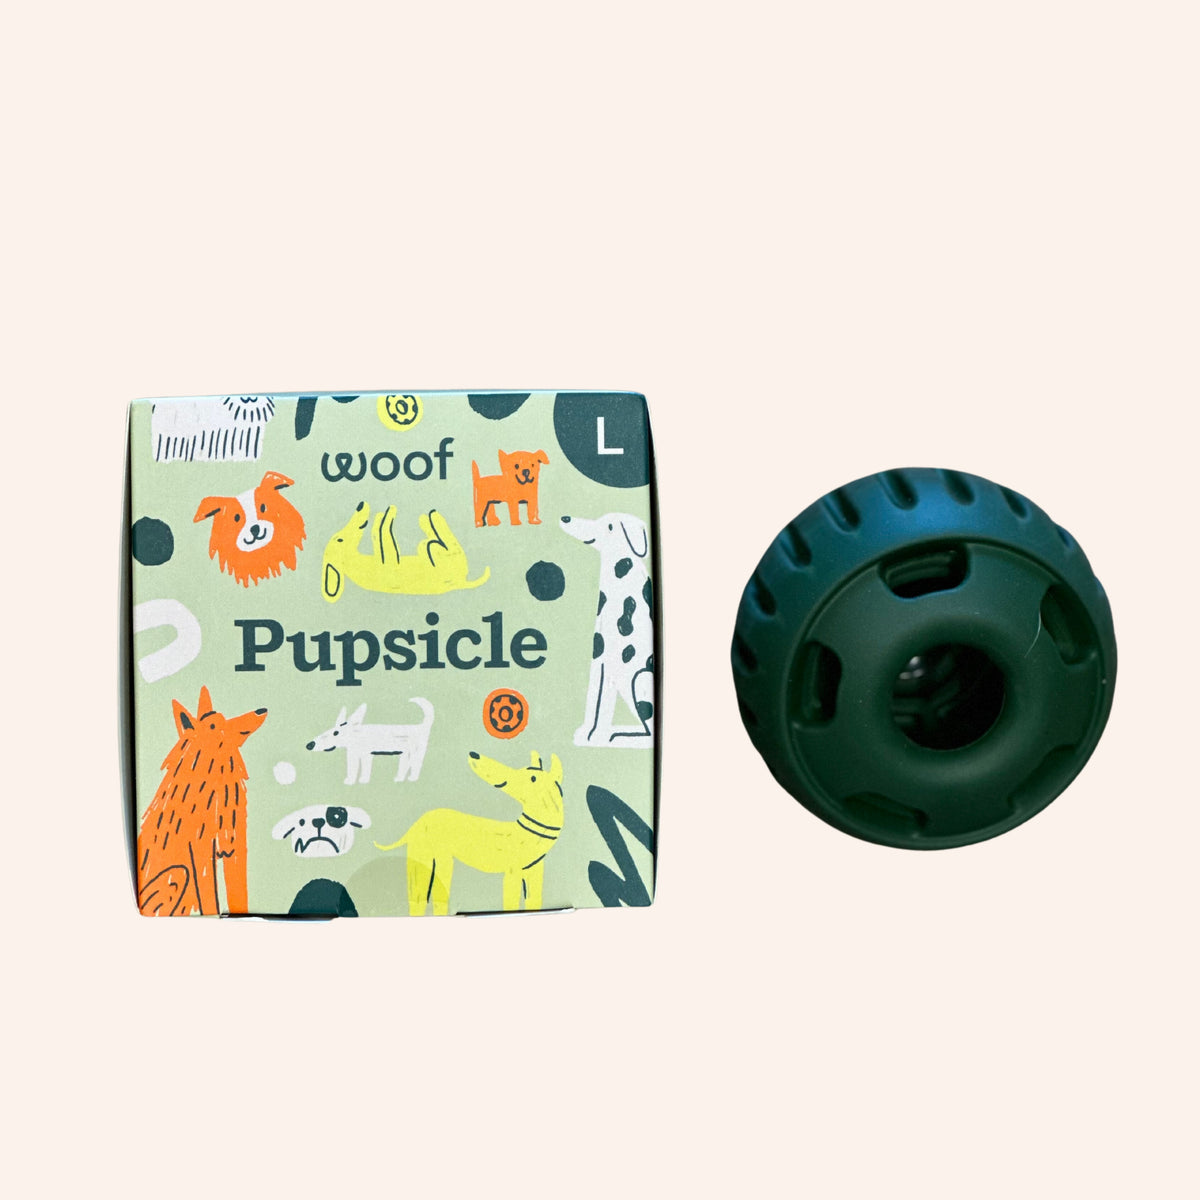 Woof The Pupsicle Dog Toy Large